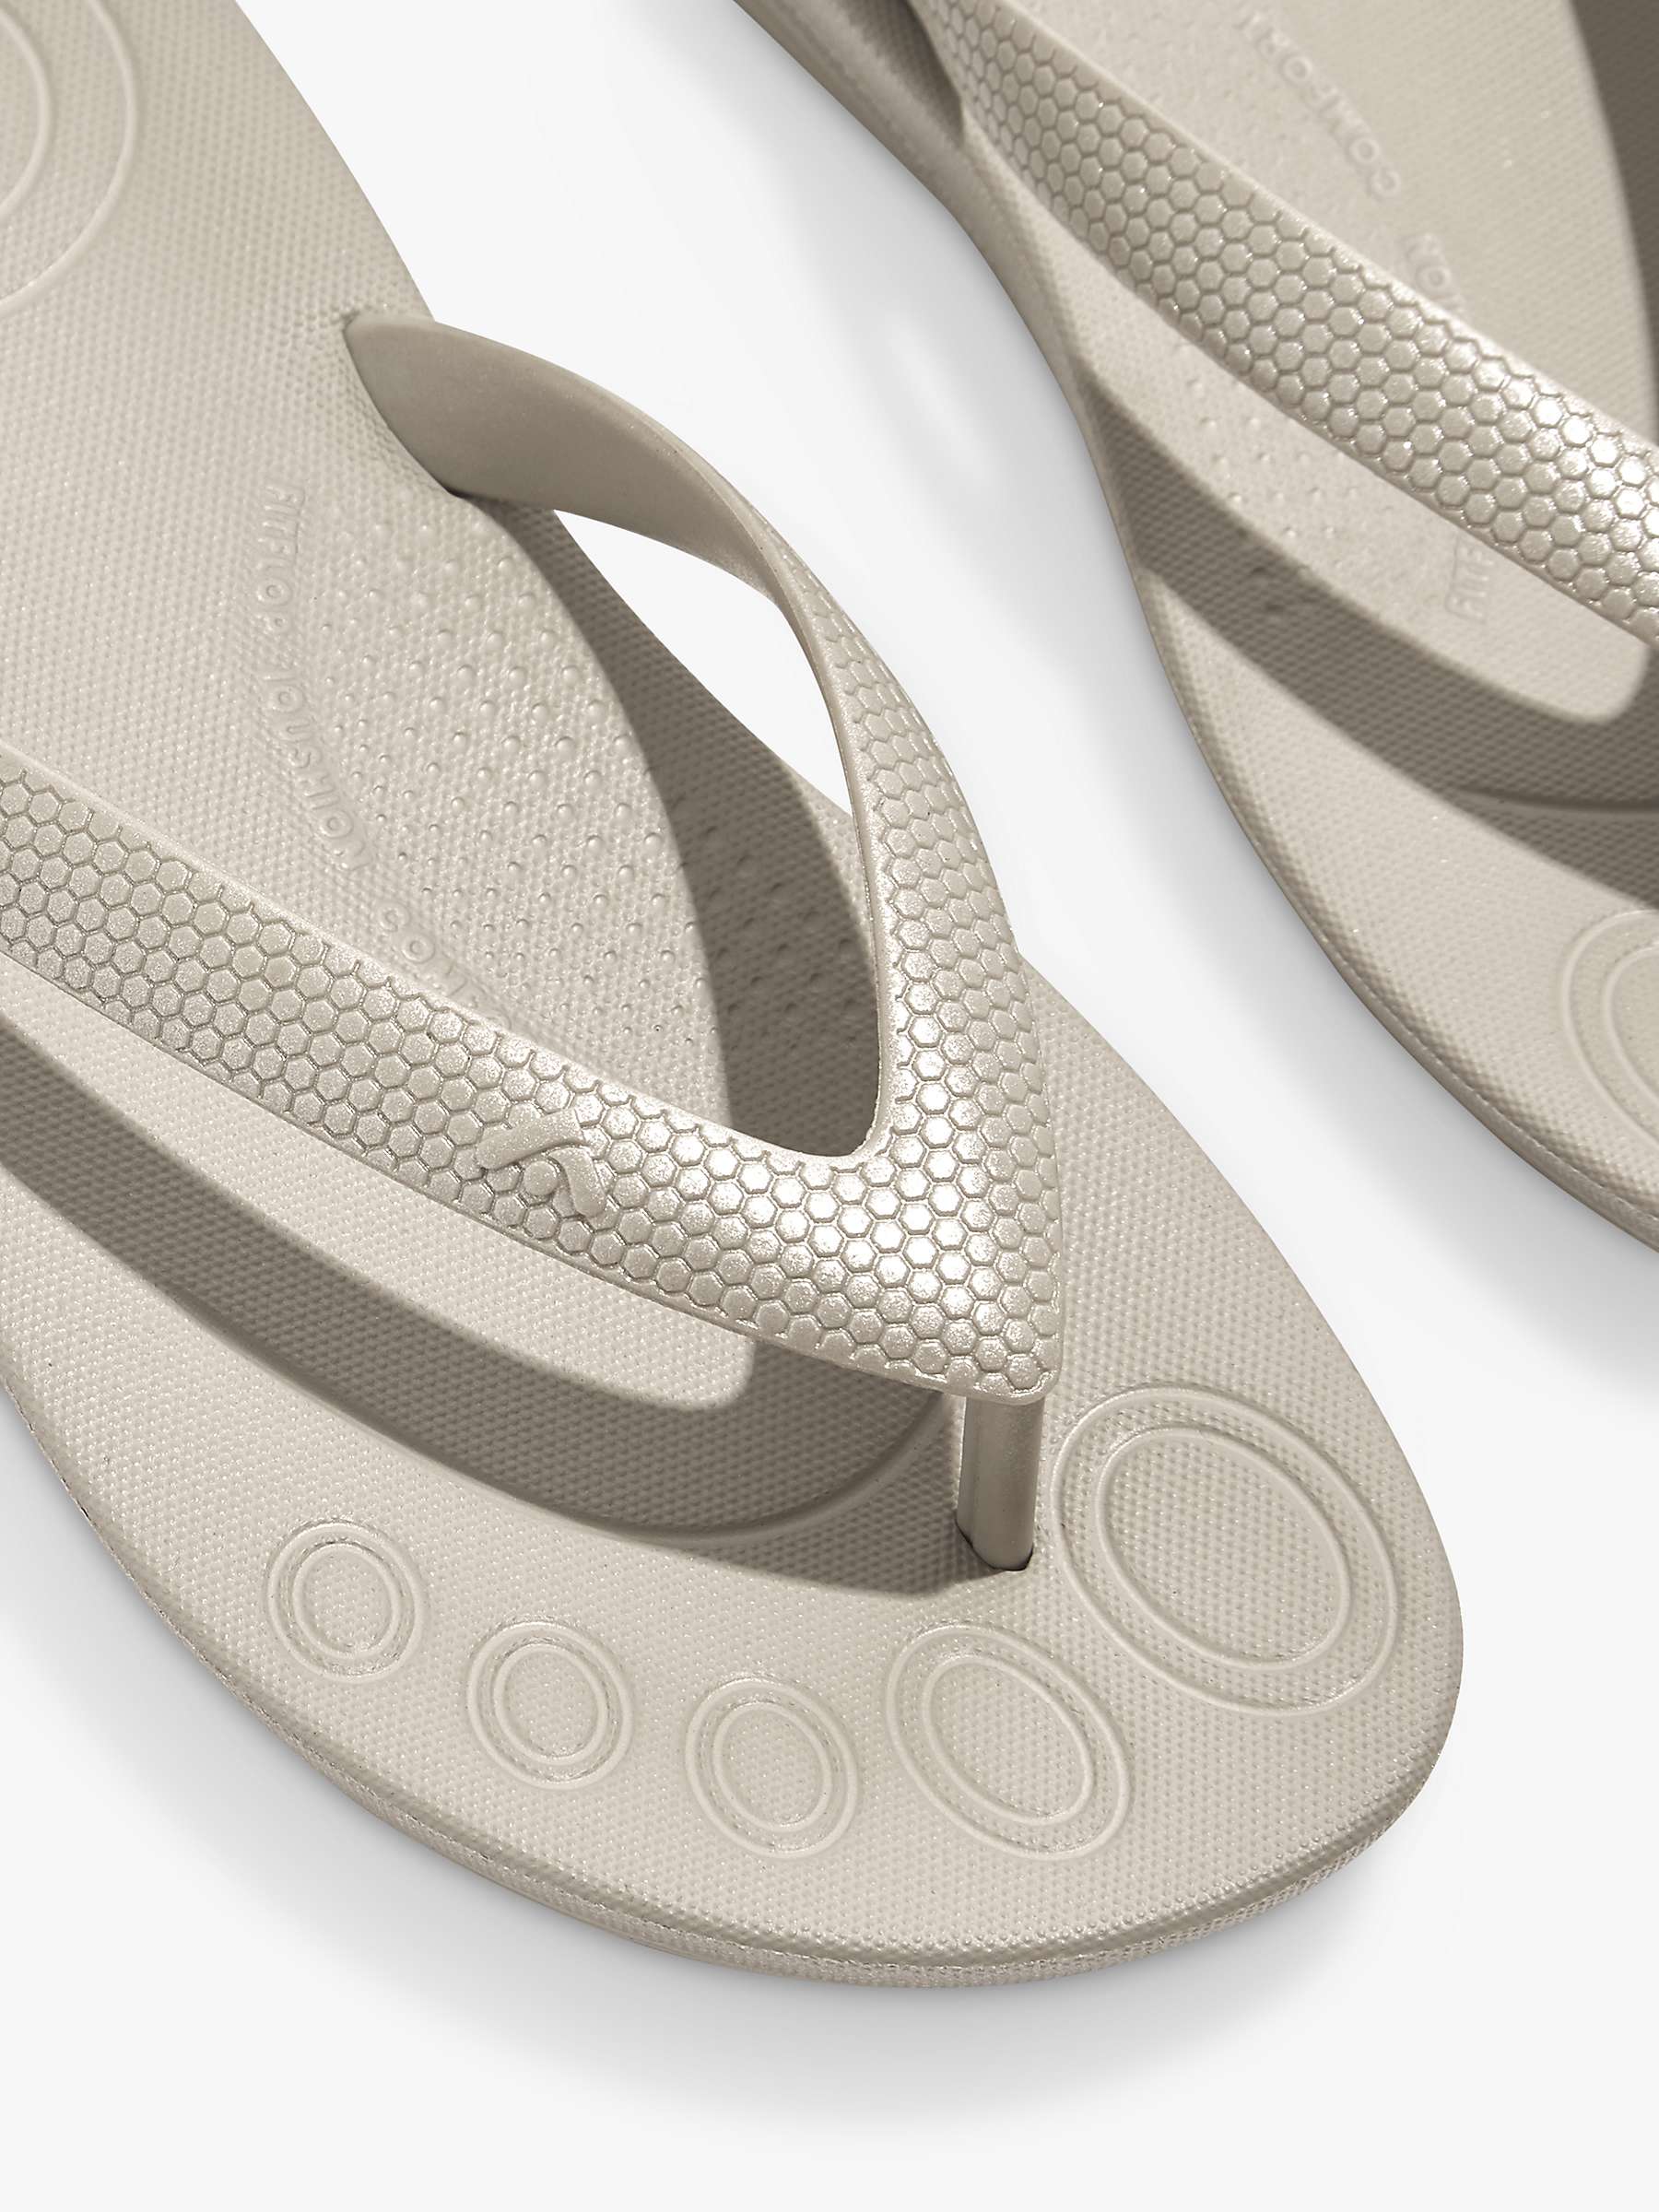 Buy FitFlop Kids' Iqushion Pearlised Flip Flops, Silver Online at johnlewis.com